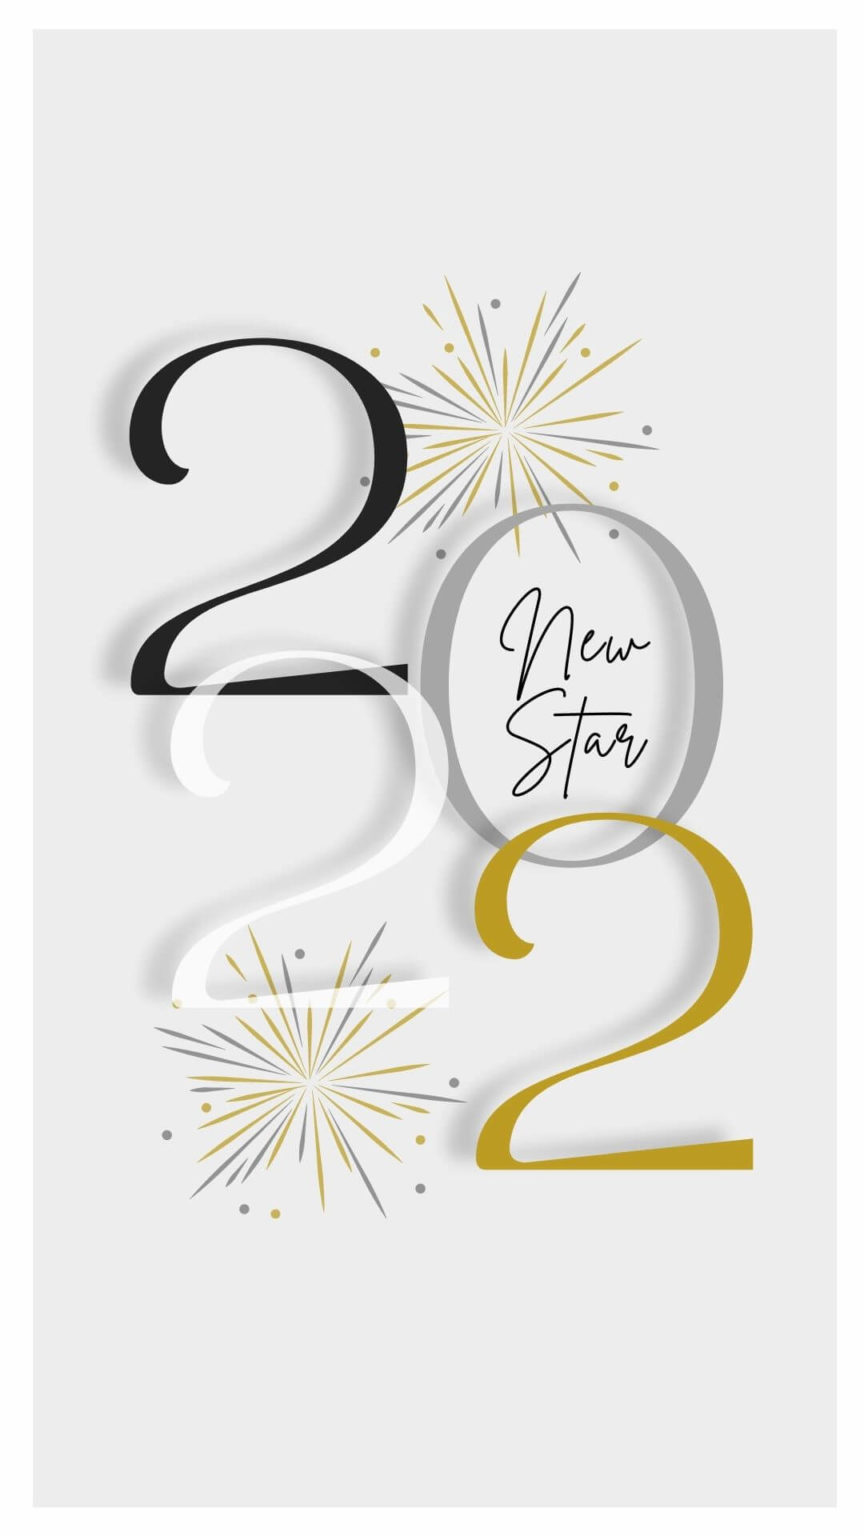 Latest New Year 2022 Wallpaper and Image for iPhone 13 and iPad Square. Happy new year wallpaper, New year wallpaper, New year's eve wallpaper